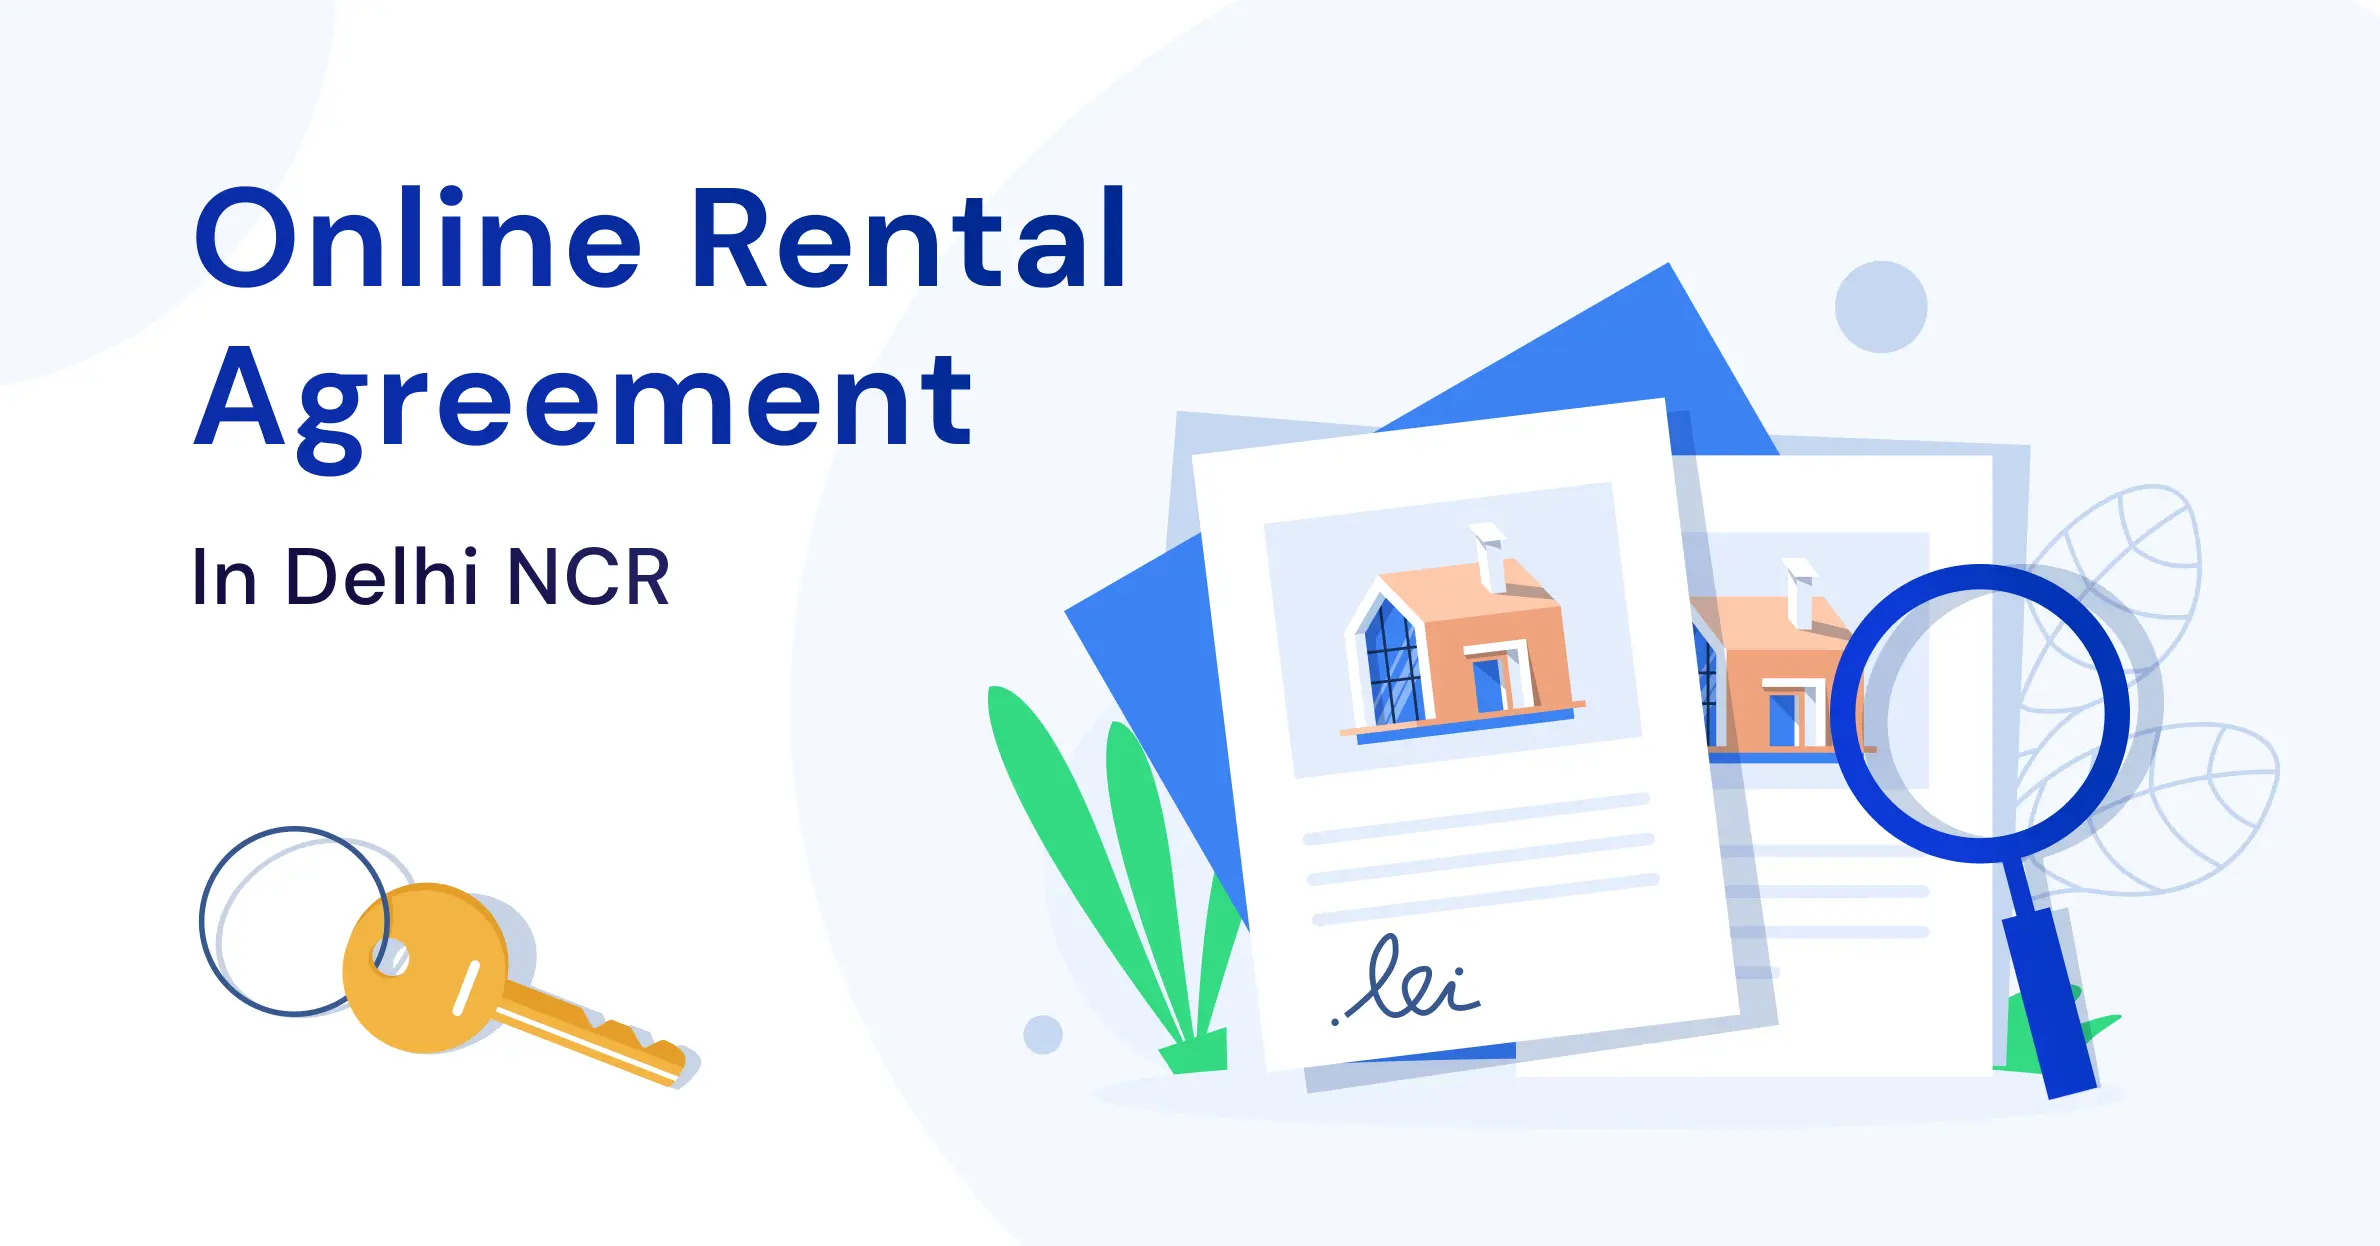 How to create an online rental agreement in Delhi NCR